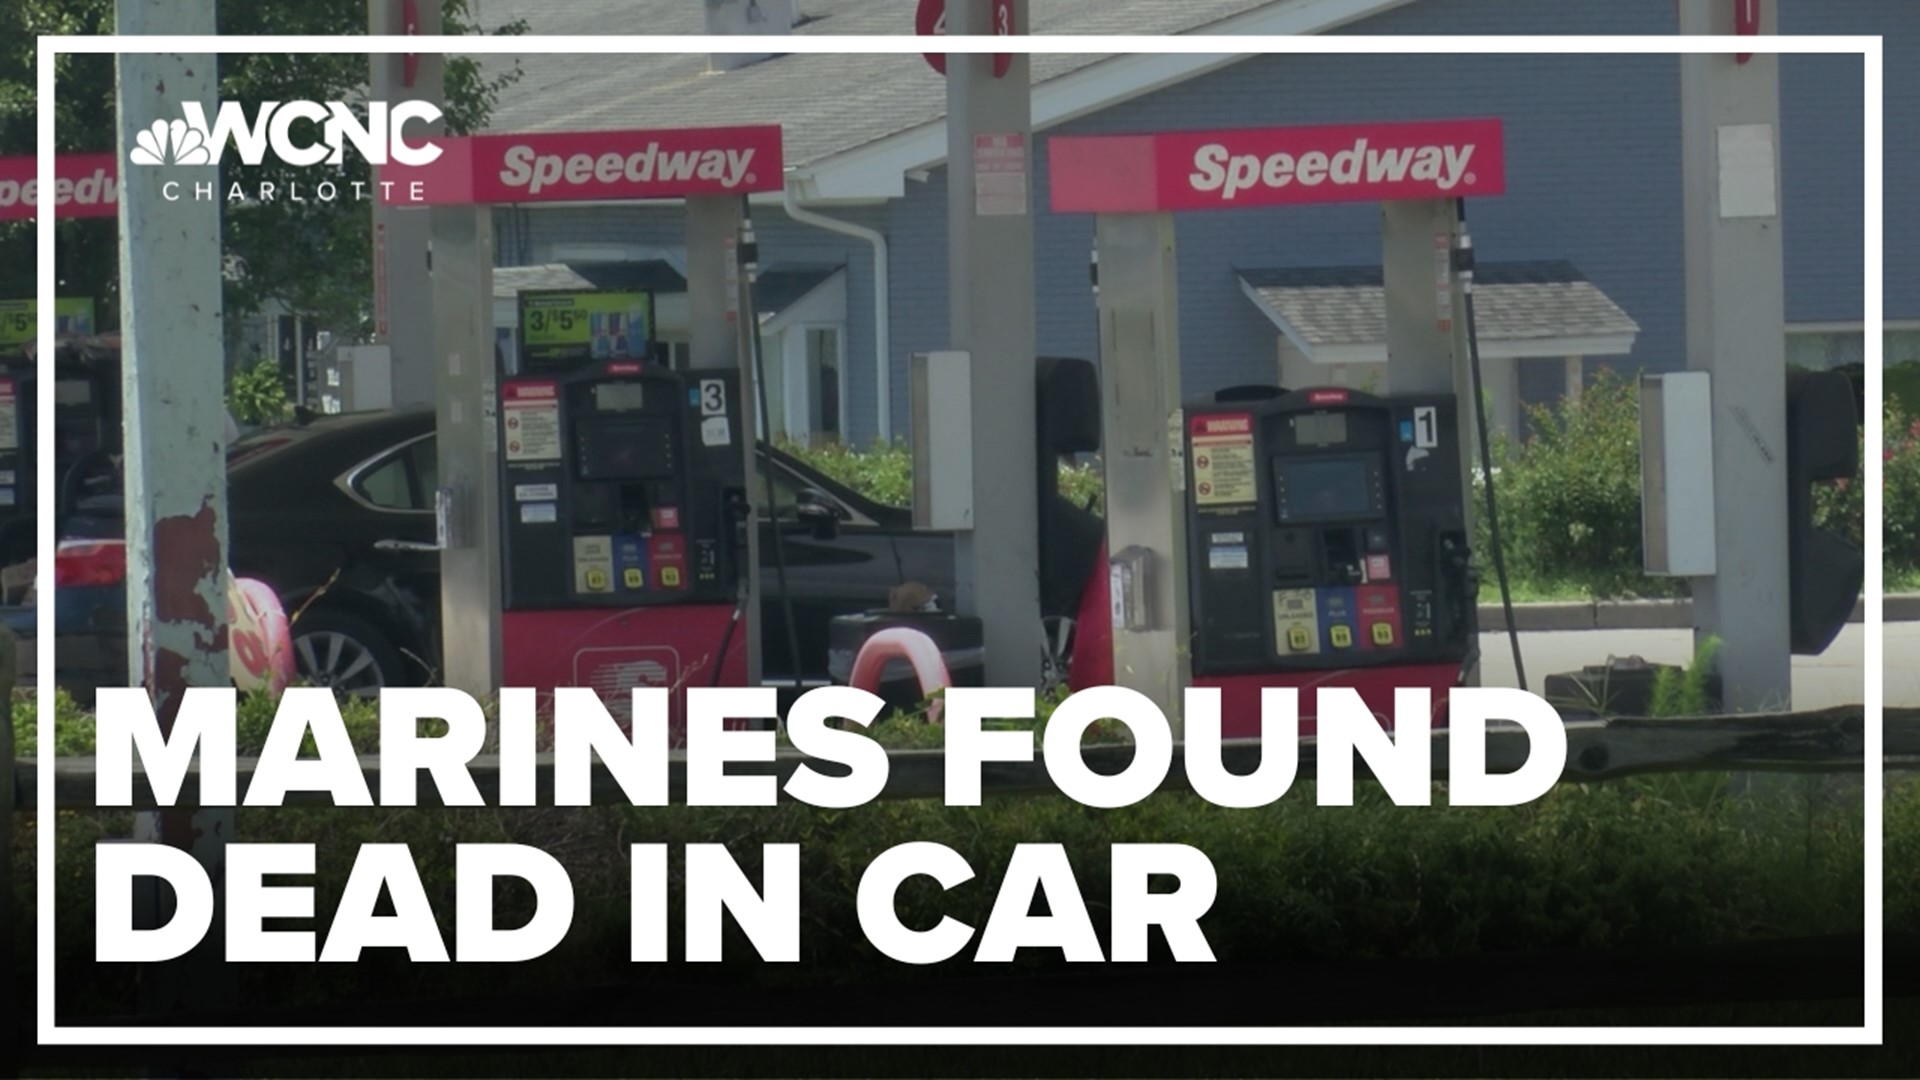 Three men who were found dead over the weekend at a North Carolina gas station have been identified as Marine lance corporals stationed at nearby Camp Lejeune.